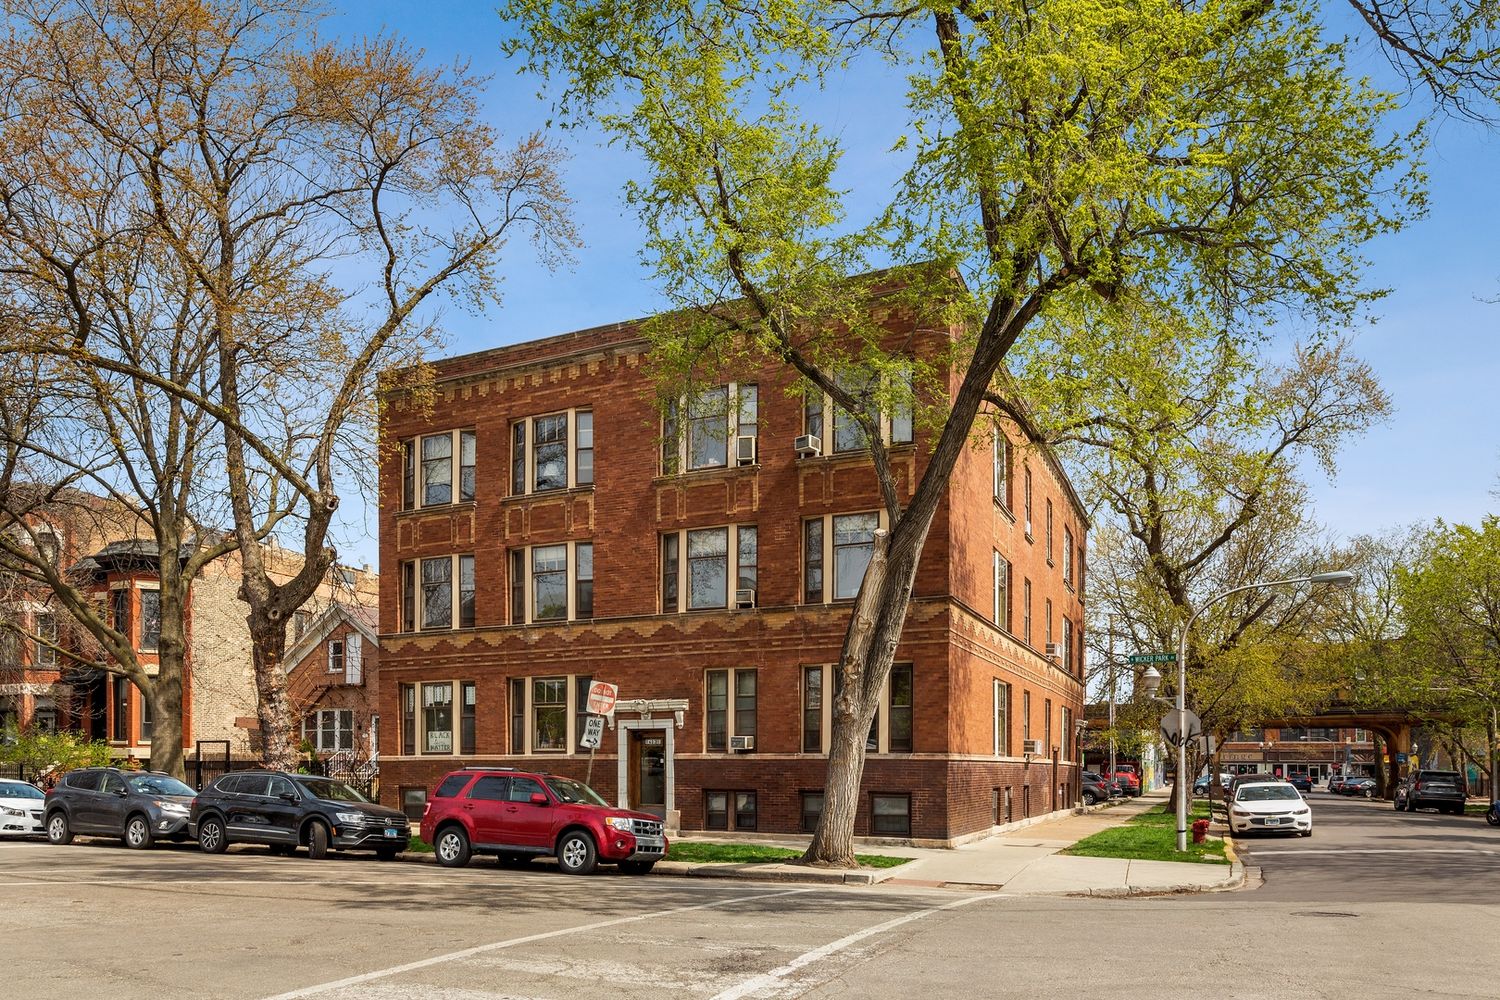 1401-03 N. Wicker Park Ave./1826 W. Evergreen Ave.